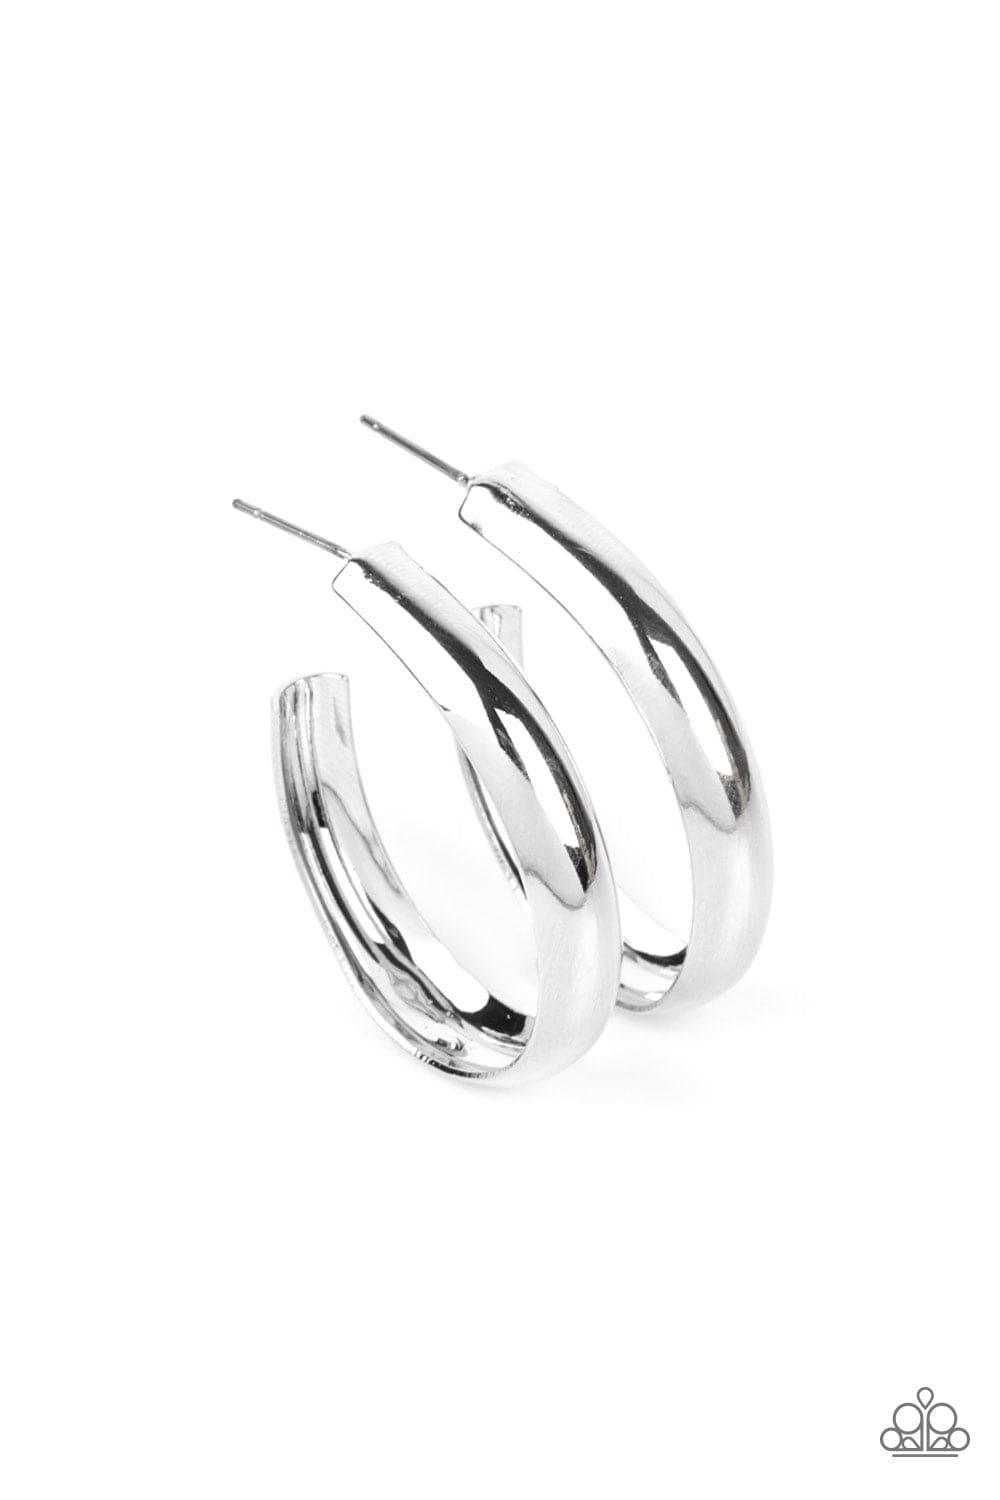 Paparazzi Accessories - Champion Curves - Silver Hoop Earrings - Bling by JessieK